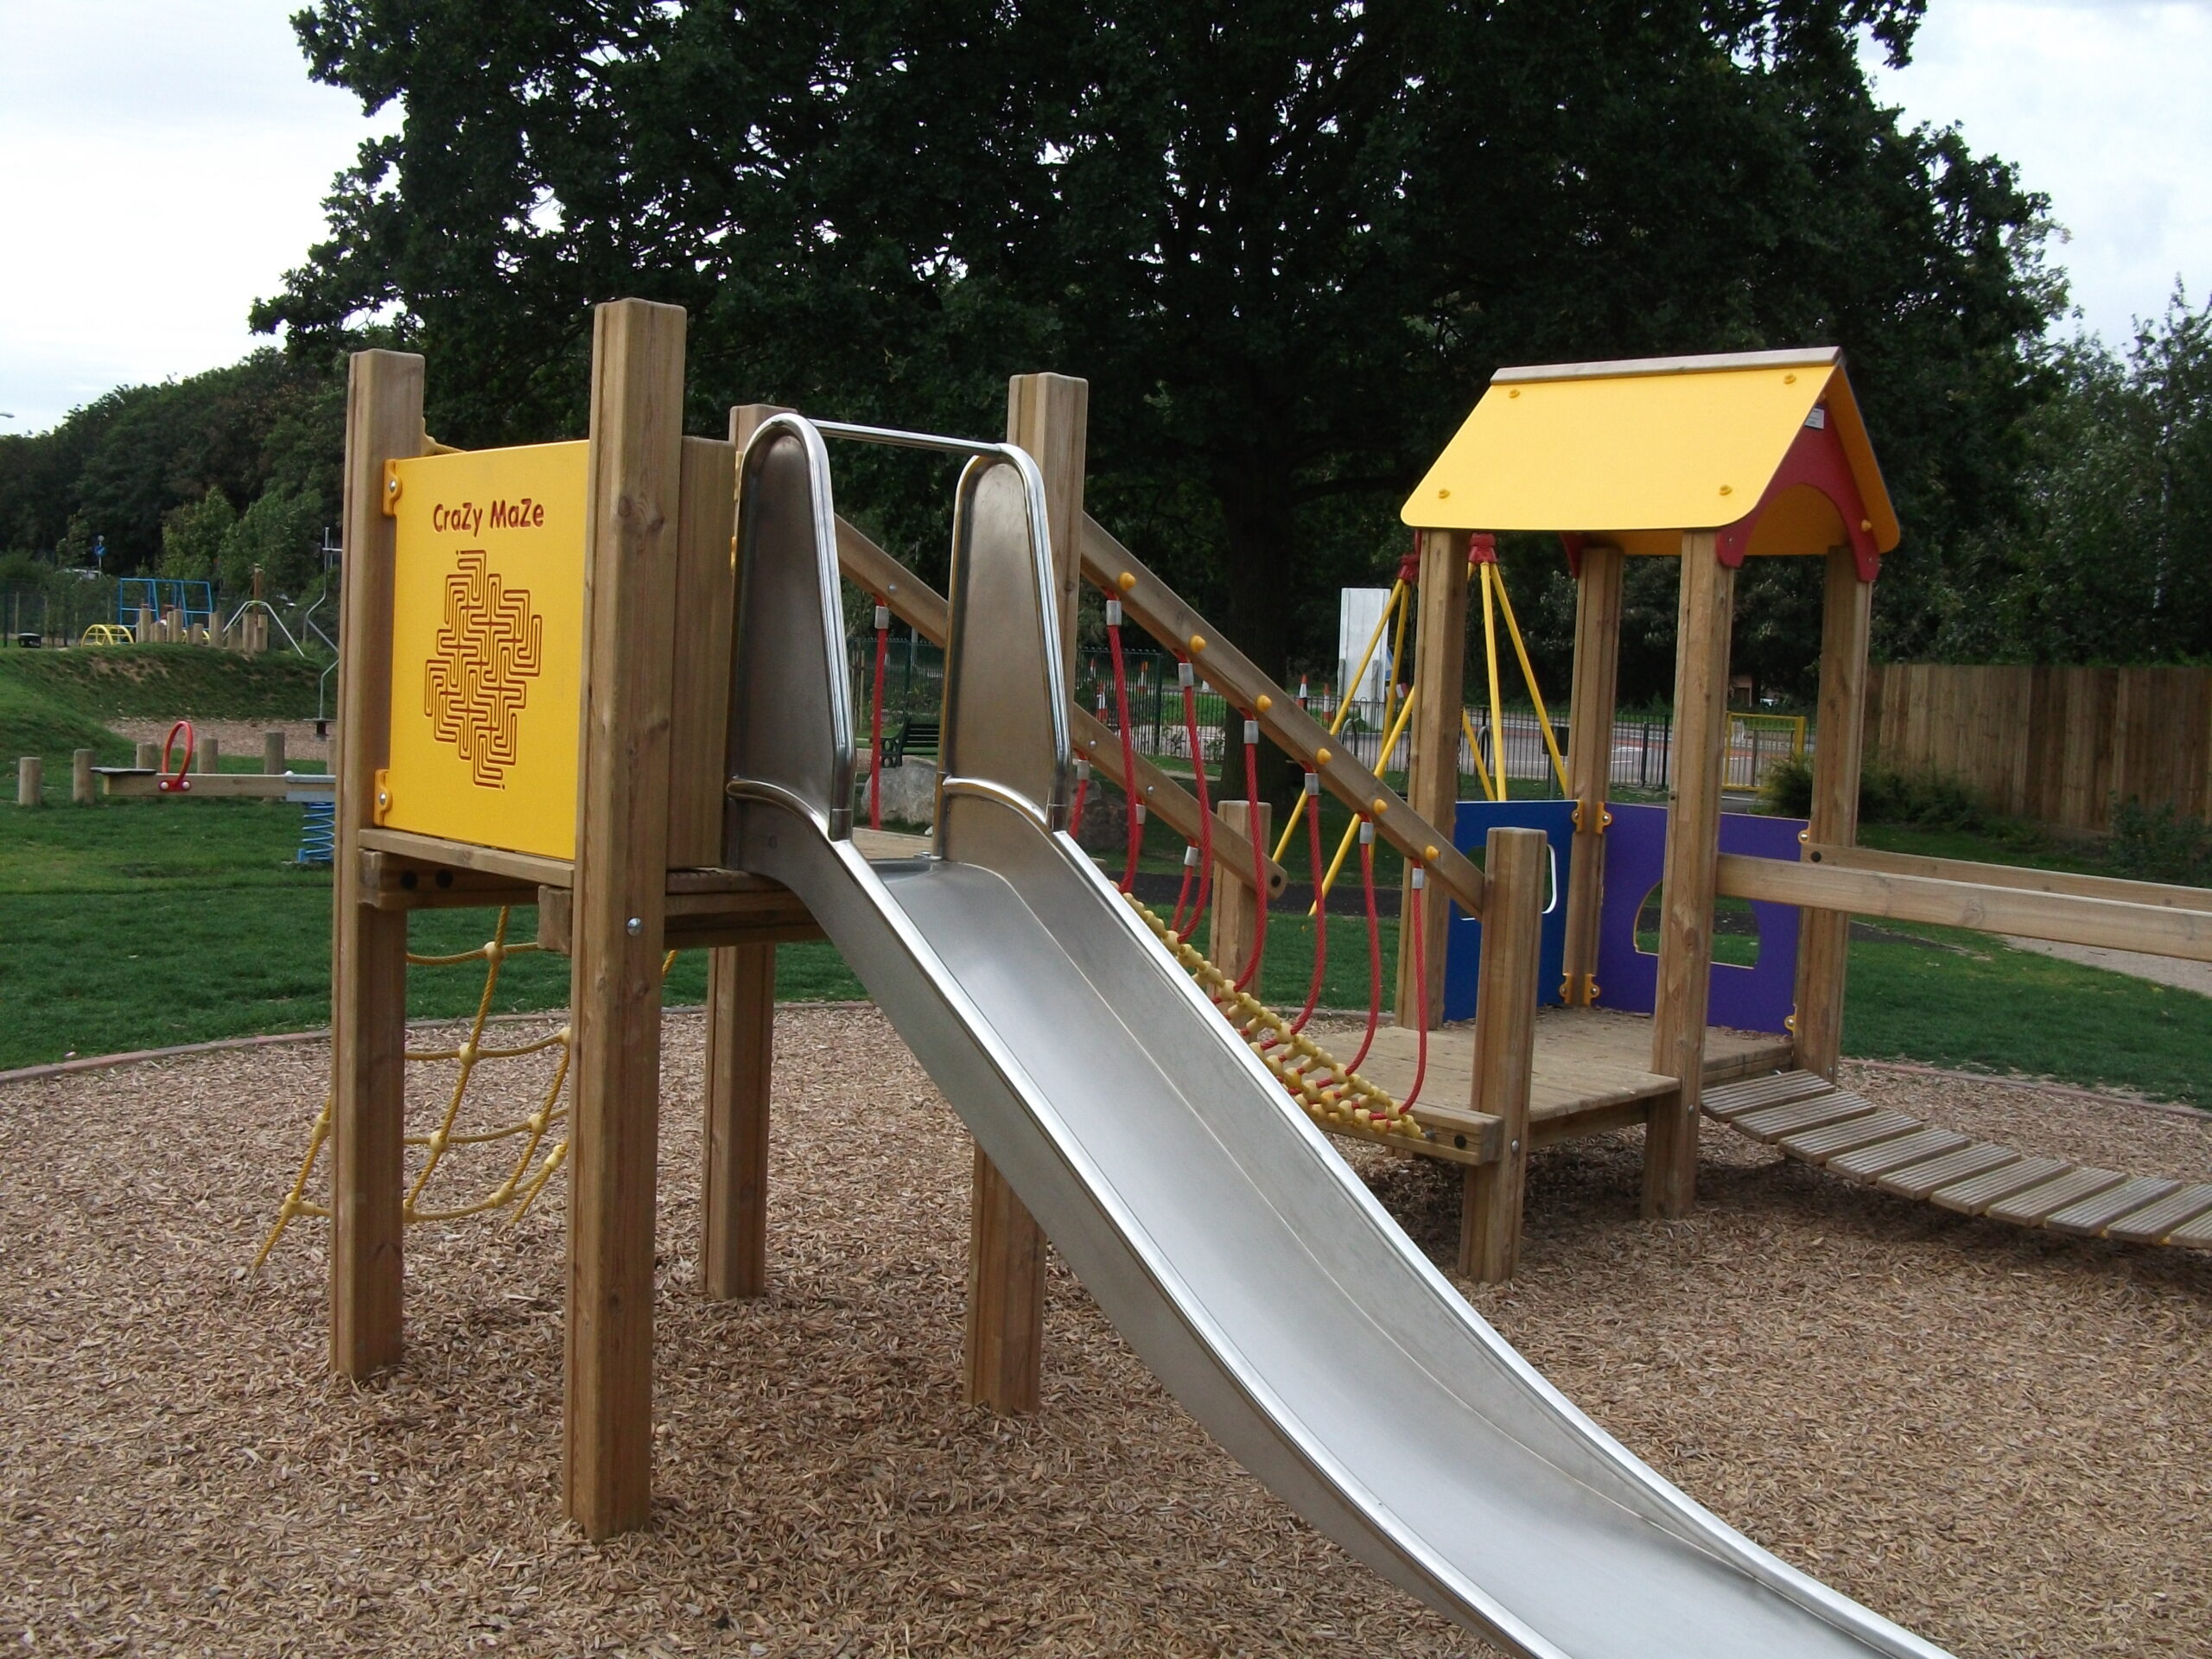 Planned maintenance at the Play Areas at the Recreation Ground and the Green